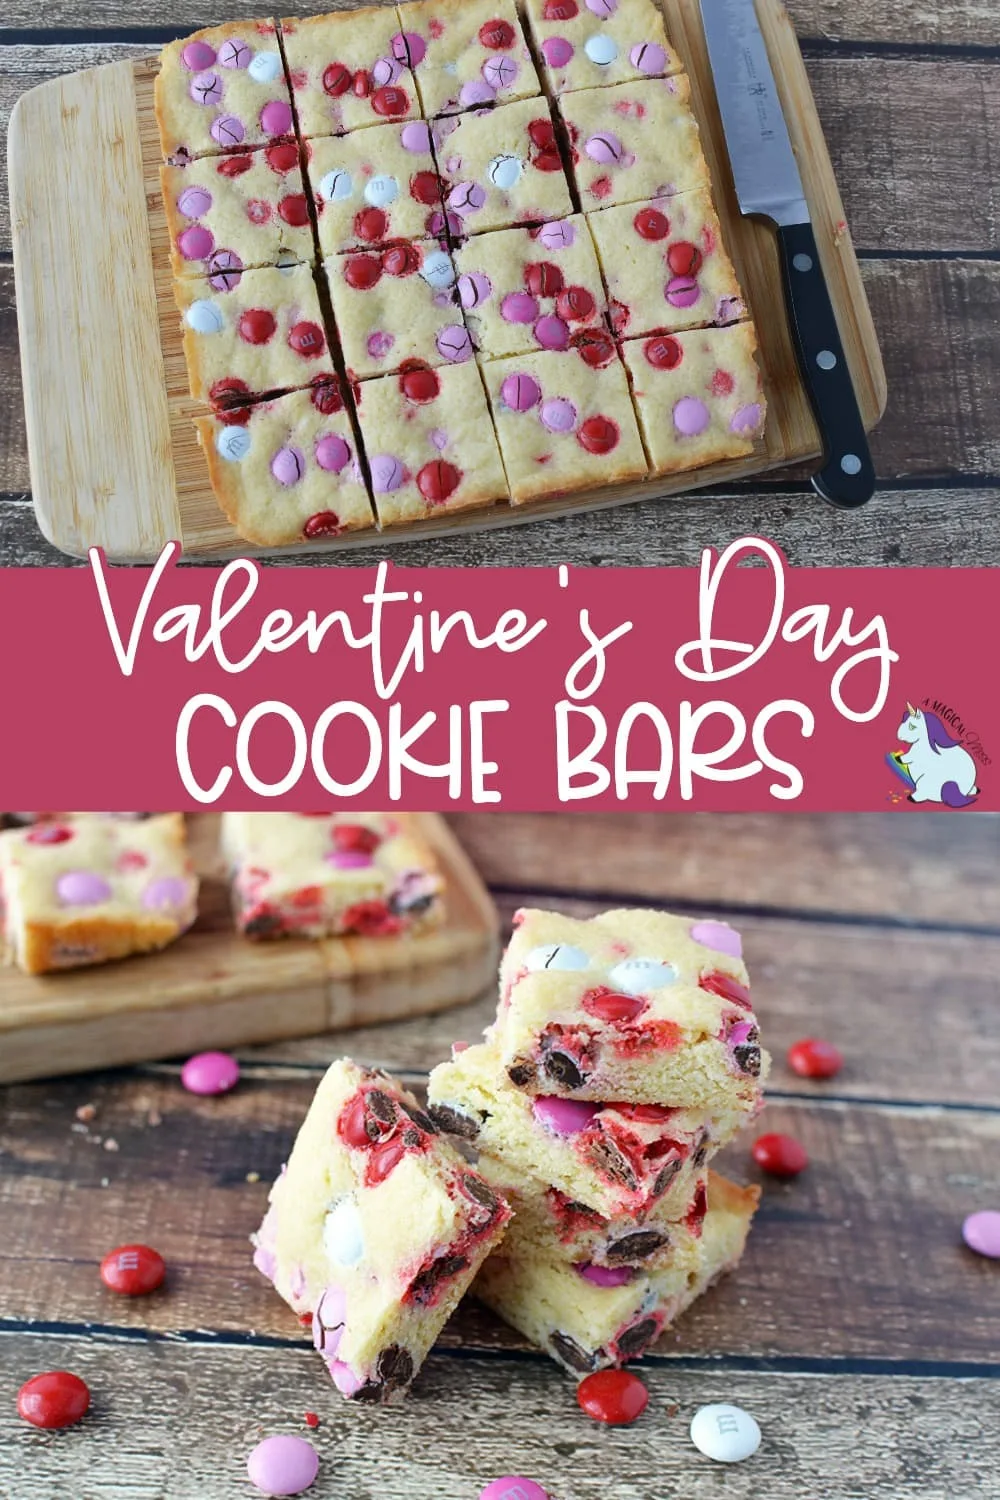 Cookie bars with Valentine's Day colored candies